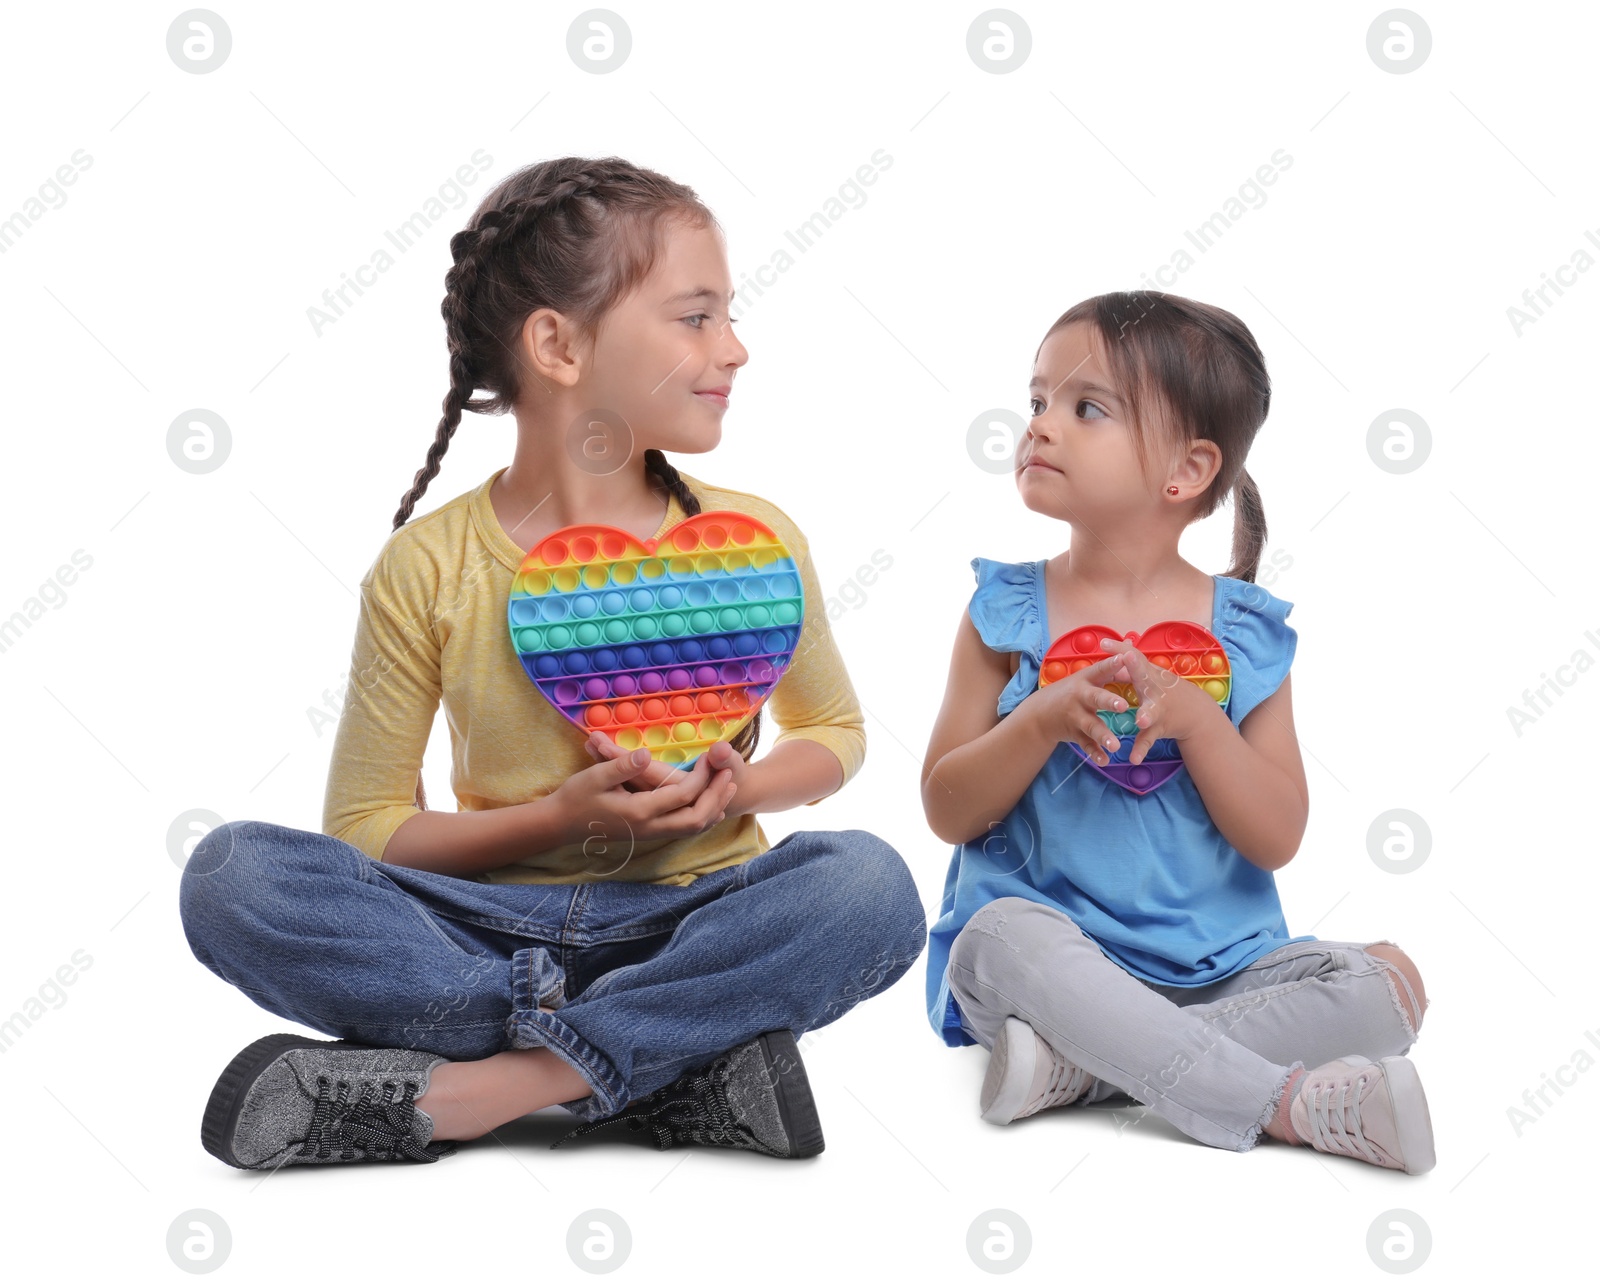 Photo of Little girls with pop it fidget toys on white background